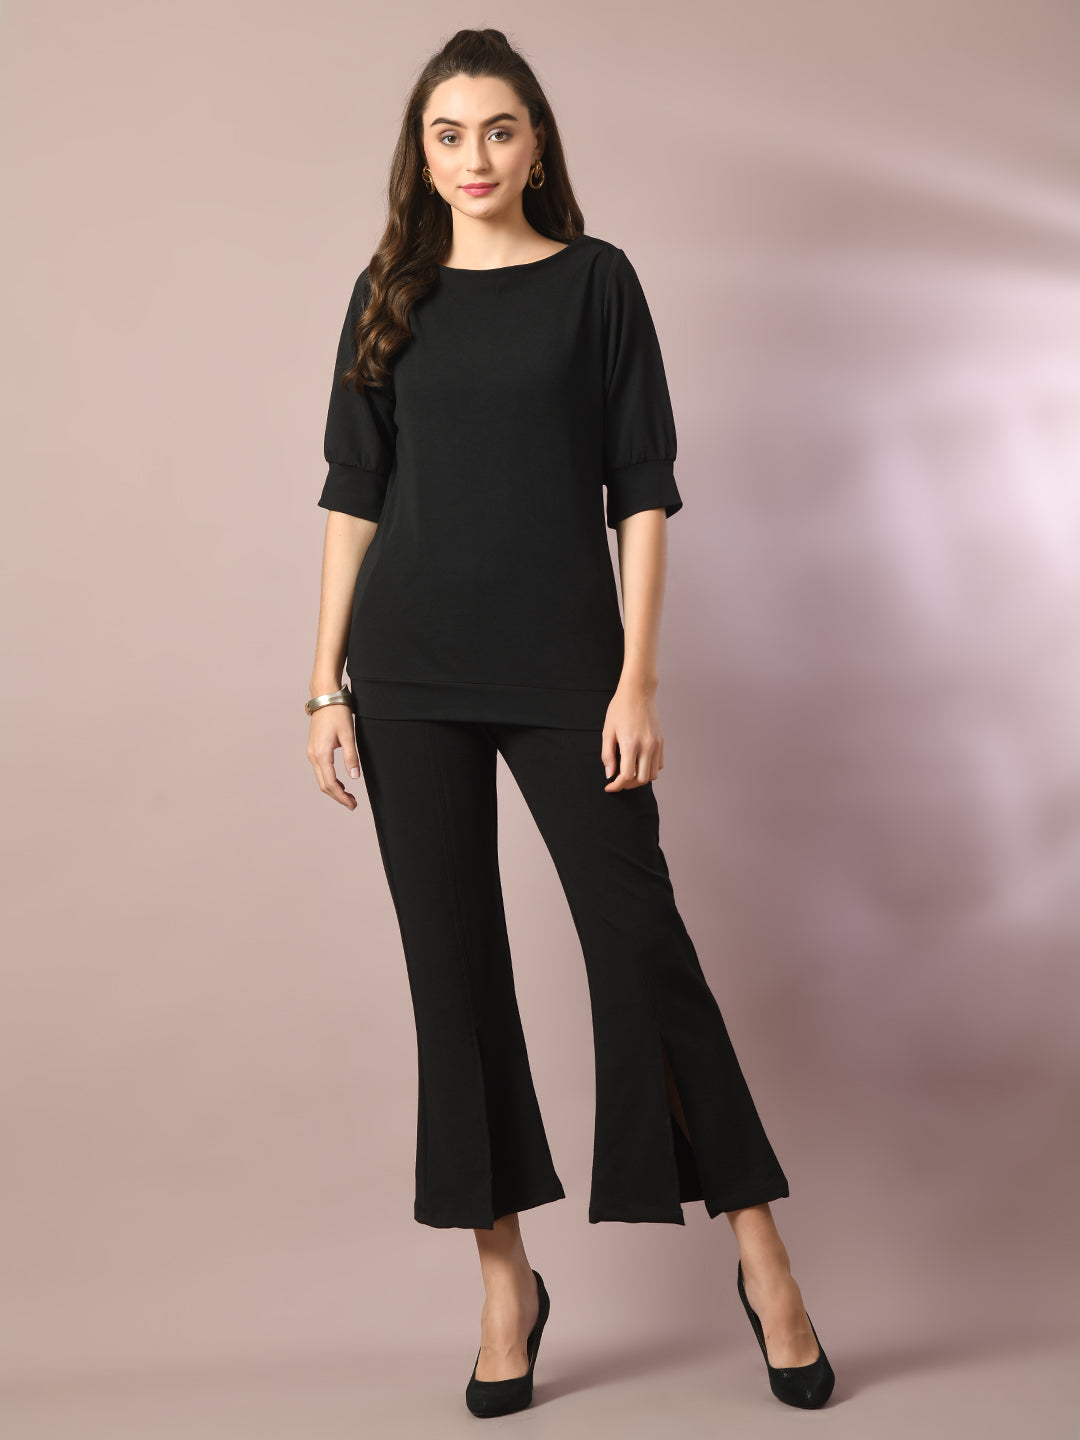 Women's  Black Solid Party Parallel Trousers   - Myshka